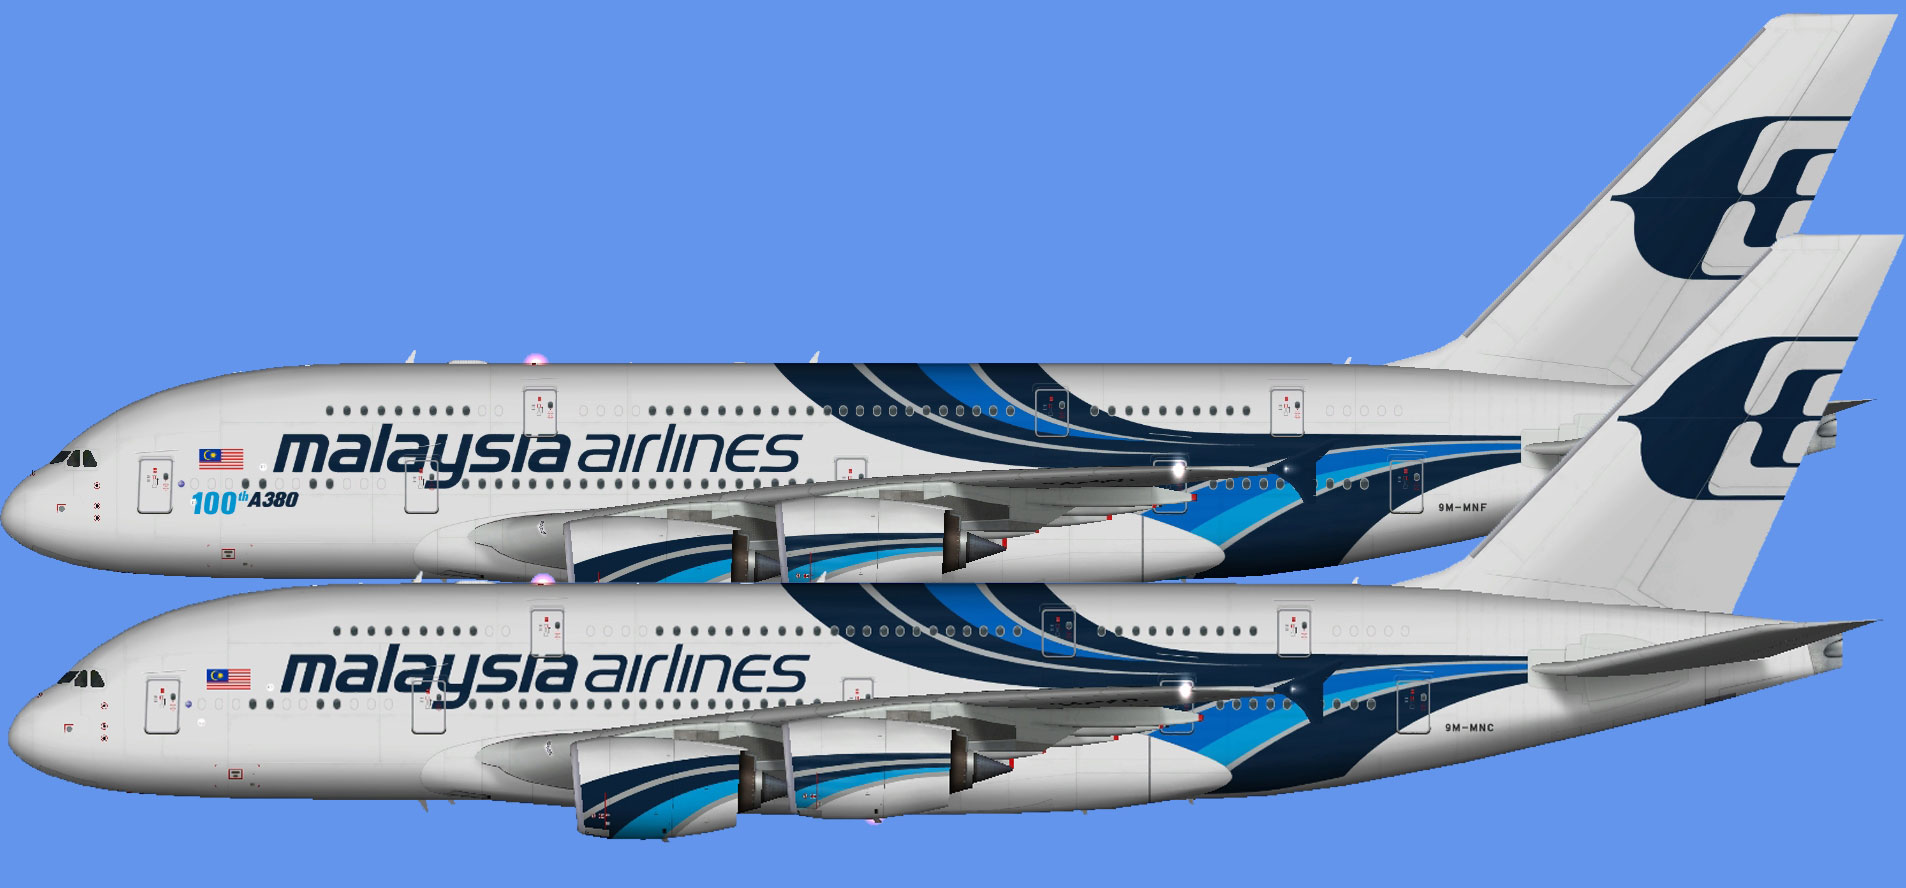 Malaysia Airlines A380 fleet (FSP)